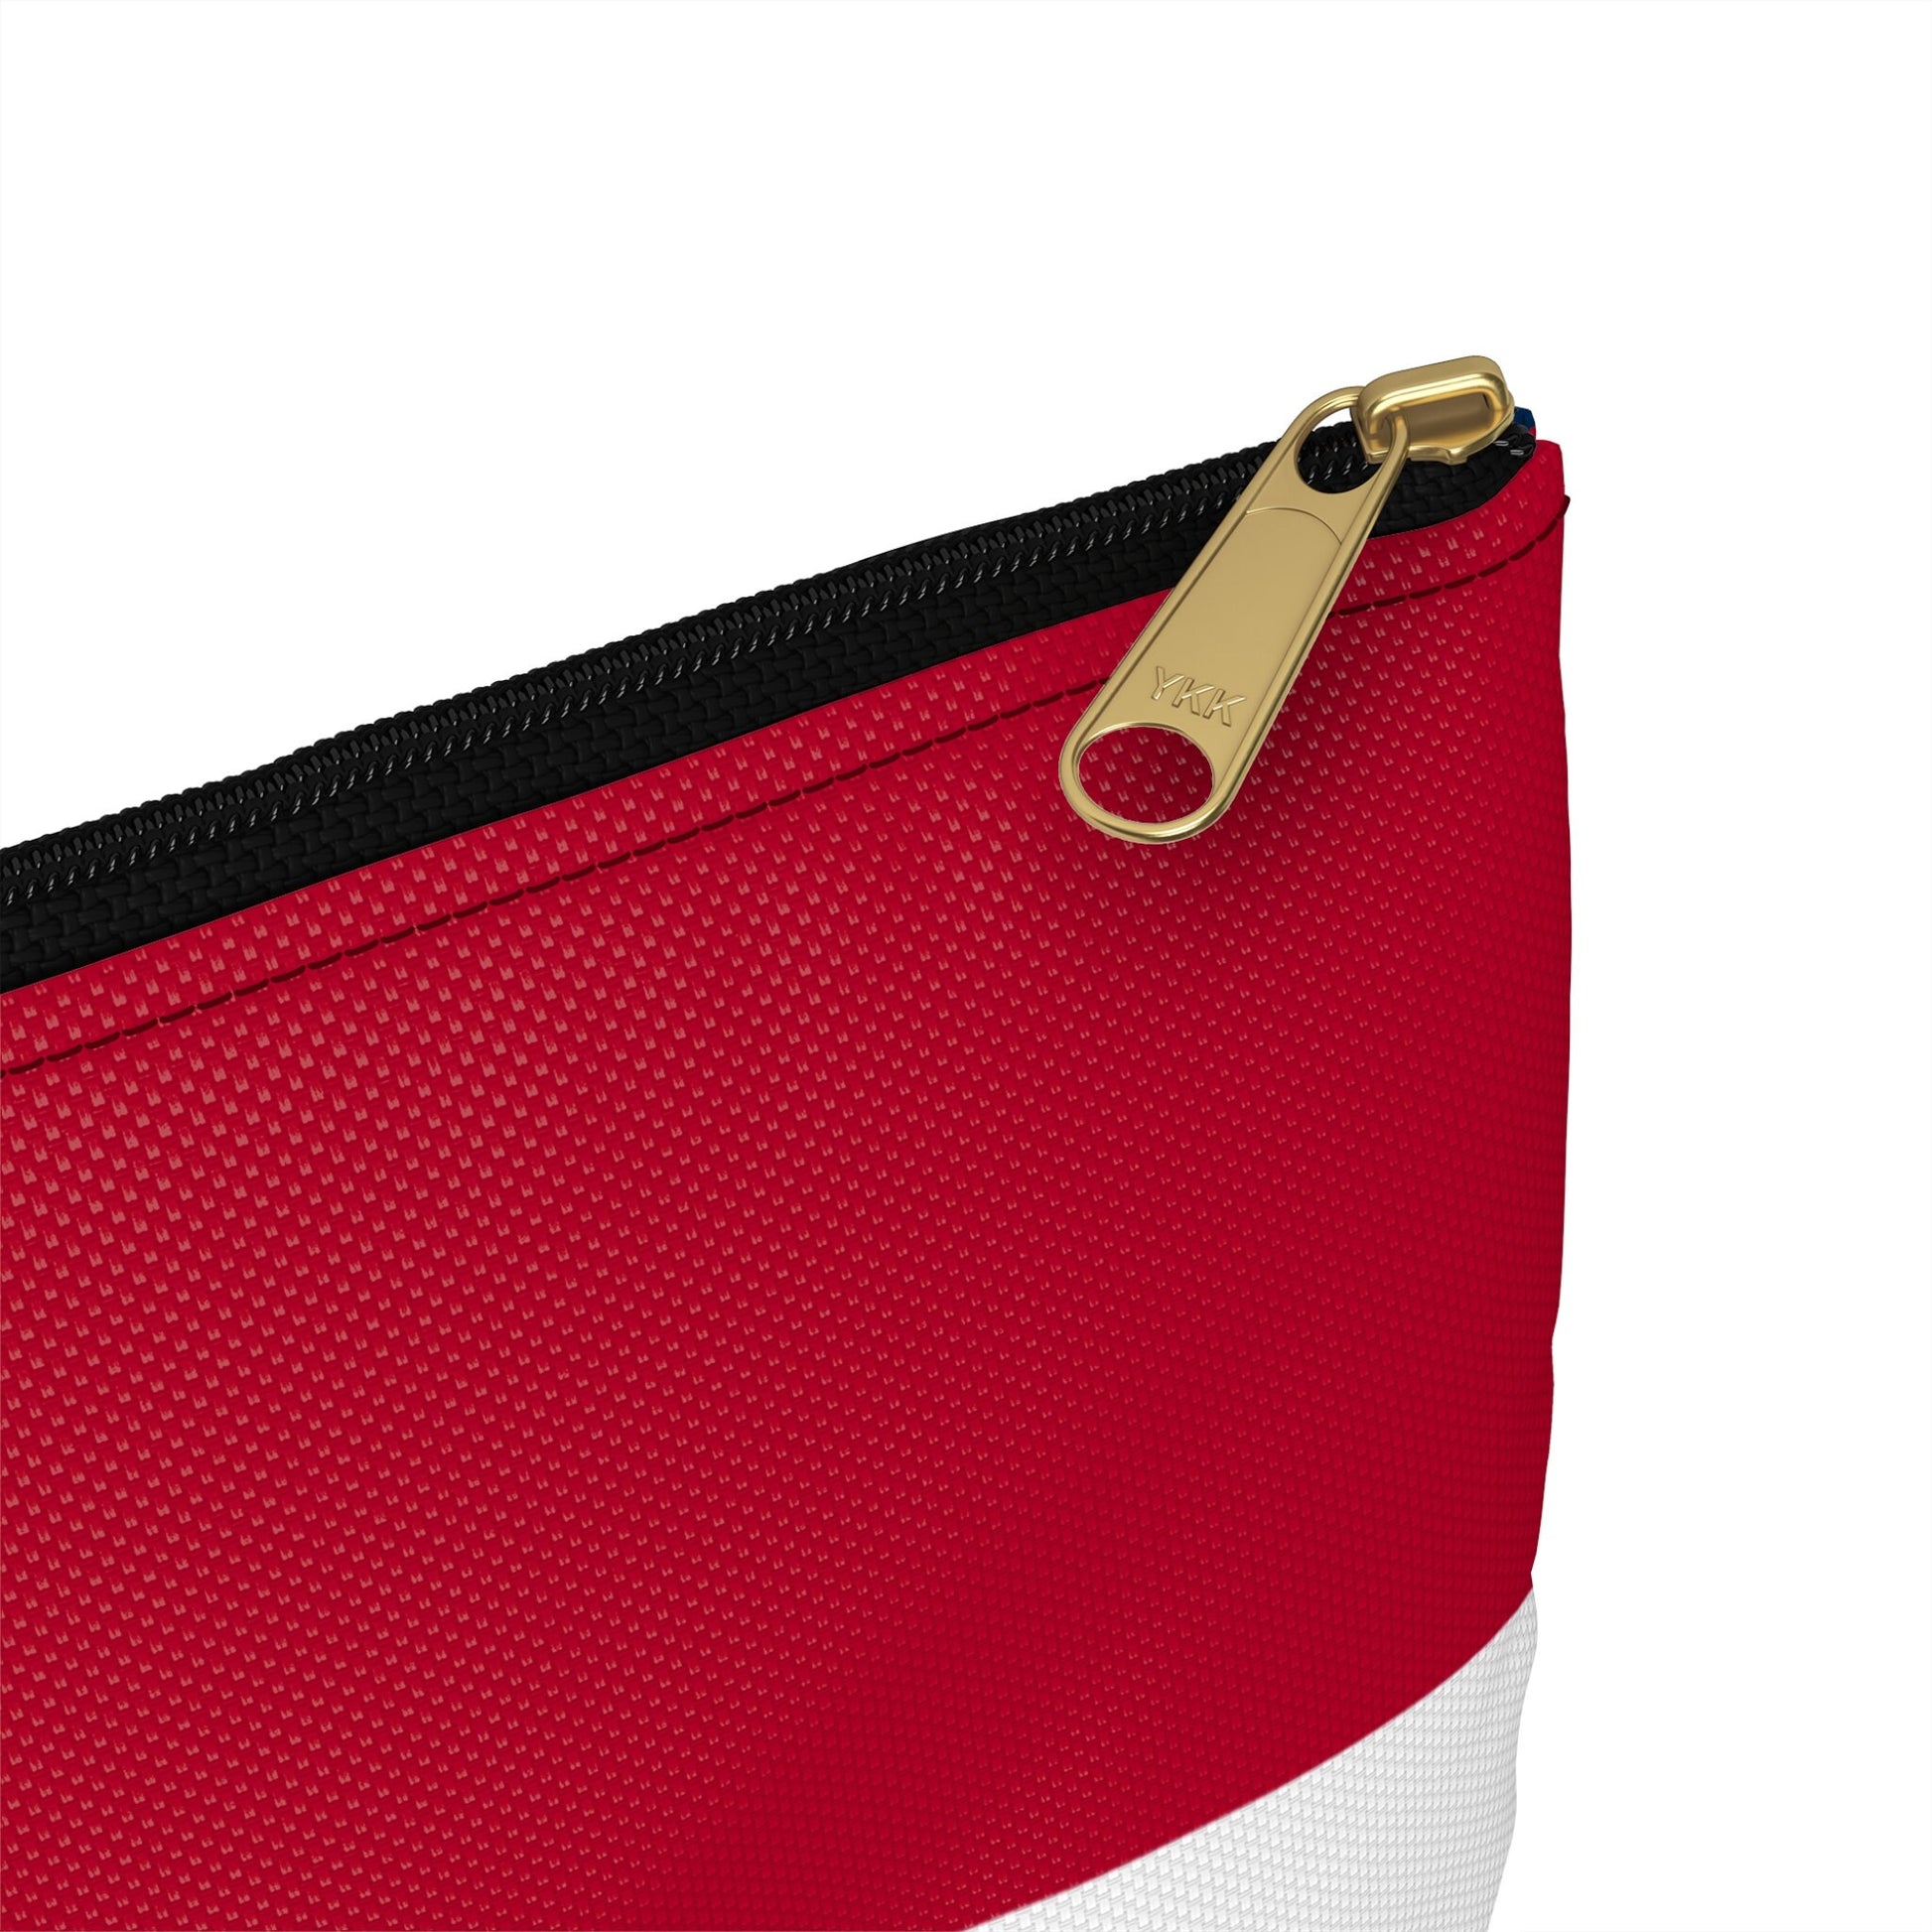 State of Georgia Flag Accessory Pouch